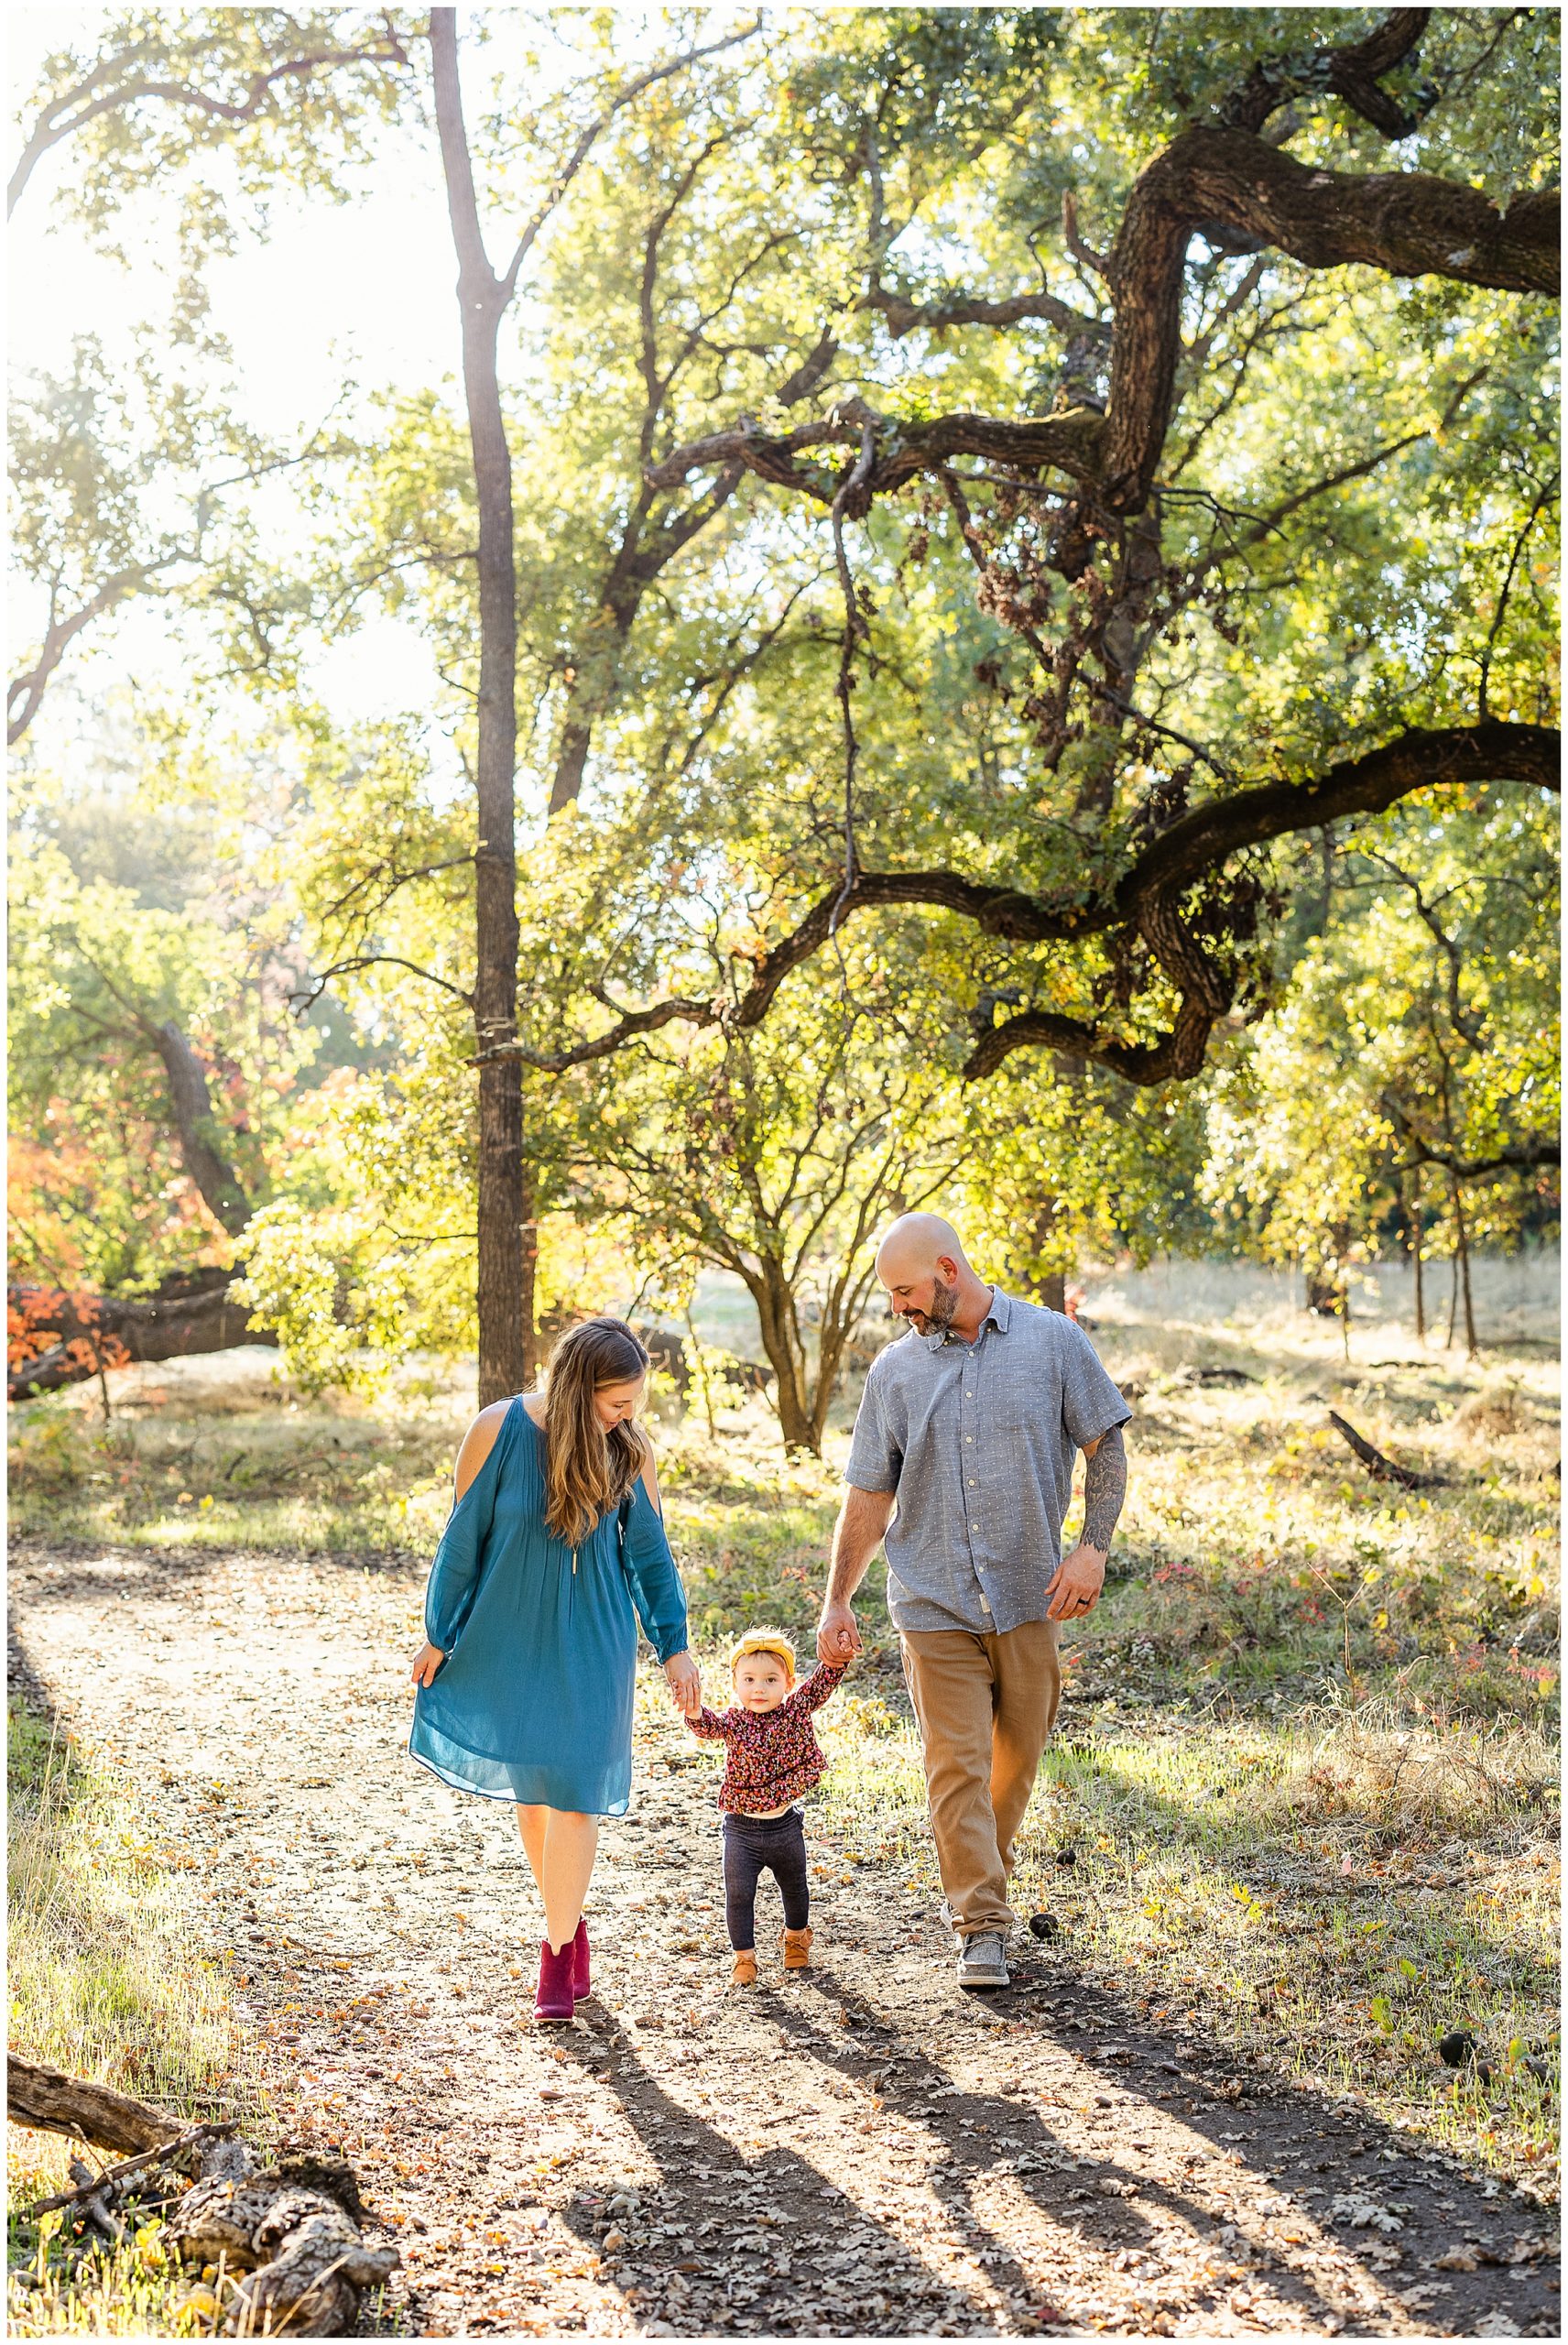 Walking in Bidwell Park with Teal Dress and Yellow Headband | Jana + Eric